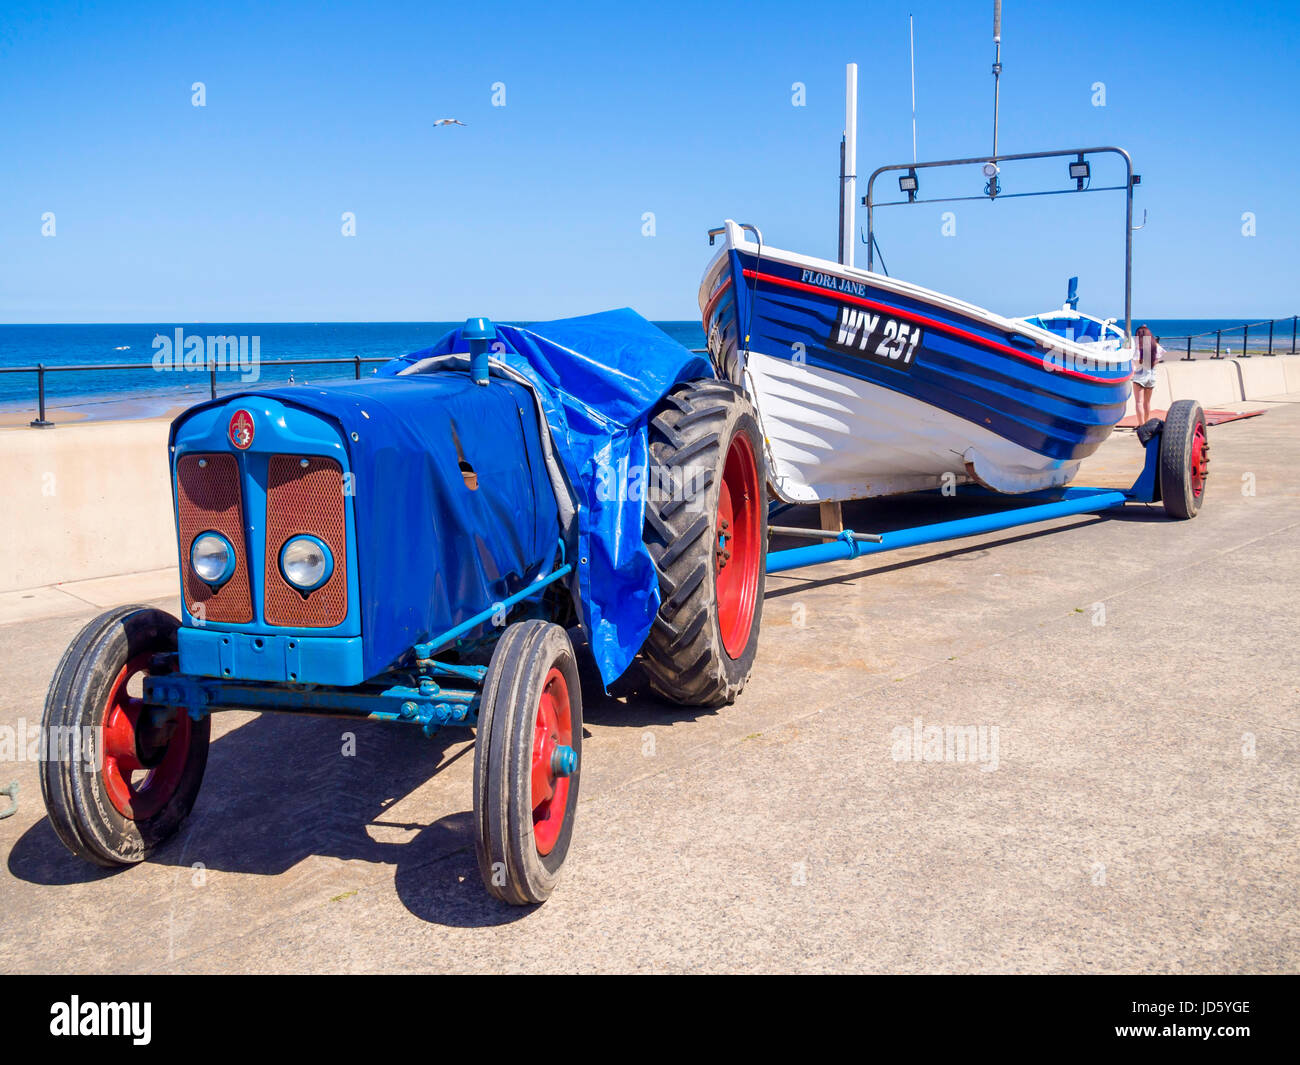 Smartly painted fishing boat FLORA JANE and tractor parked the Esplanade at Redcar North Yorkshire UK Stock Photo